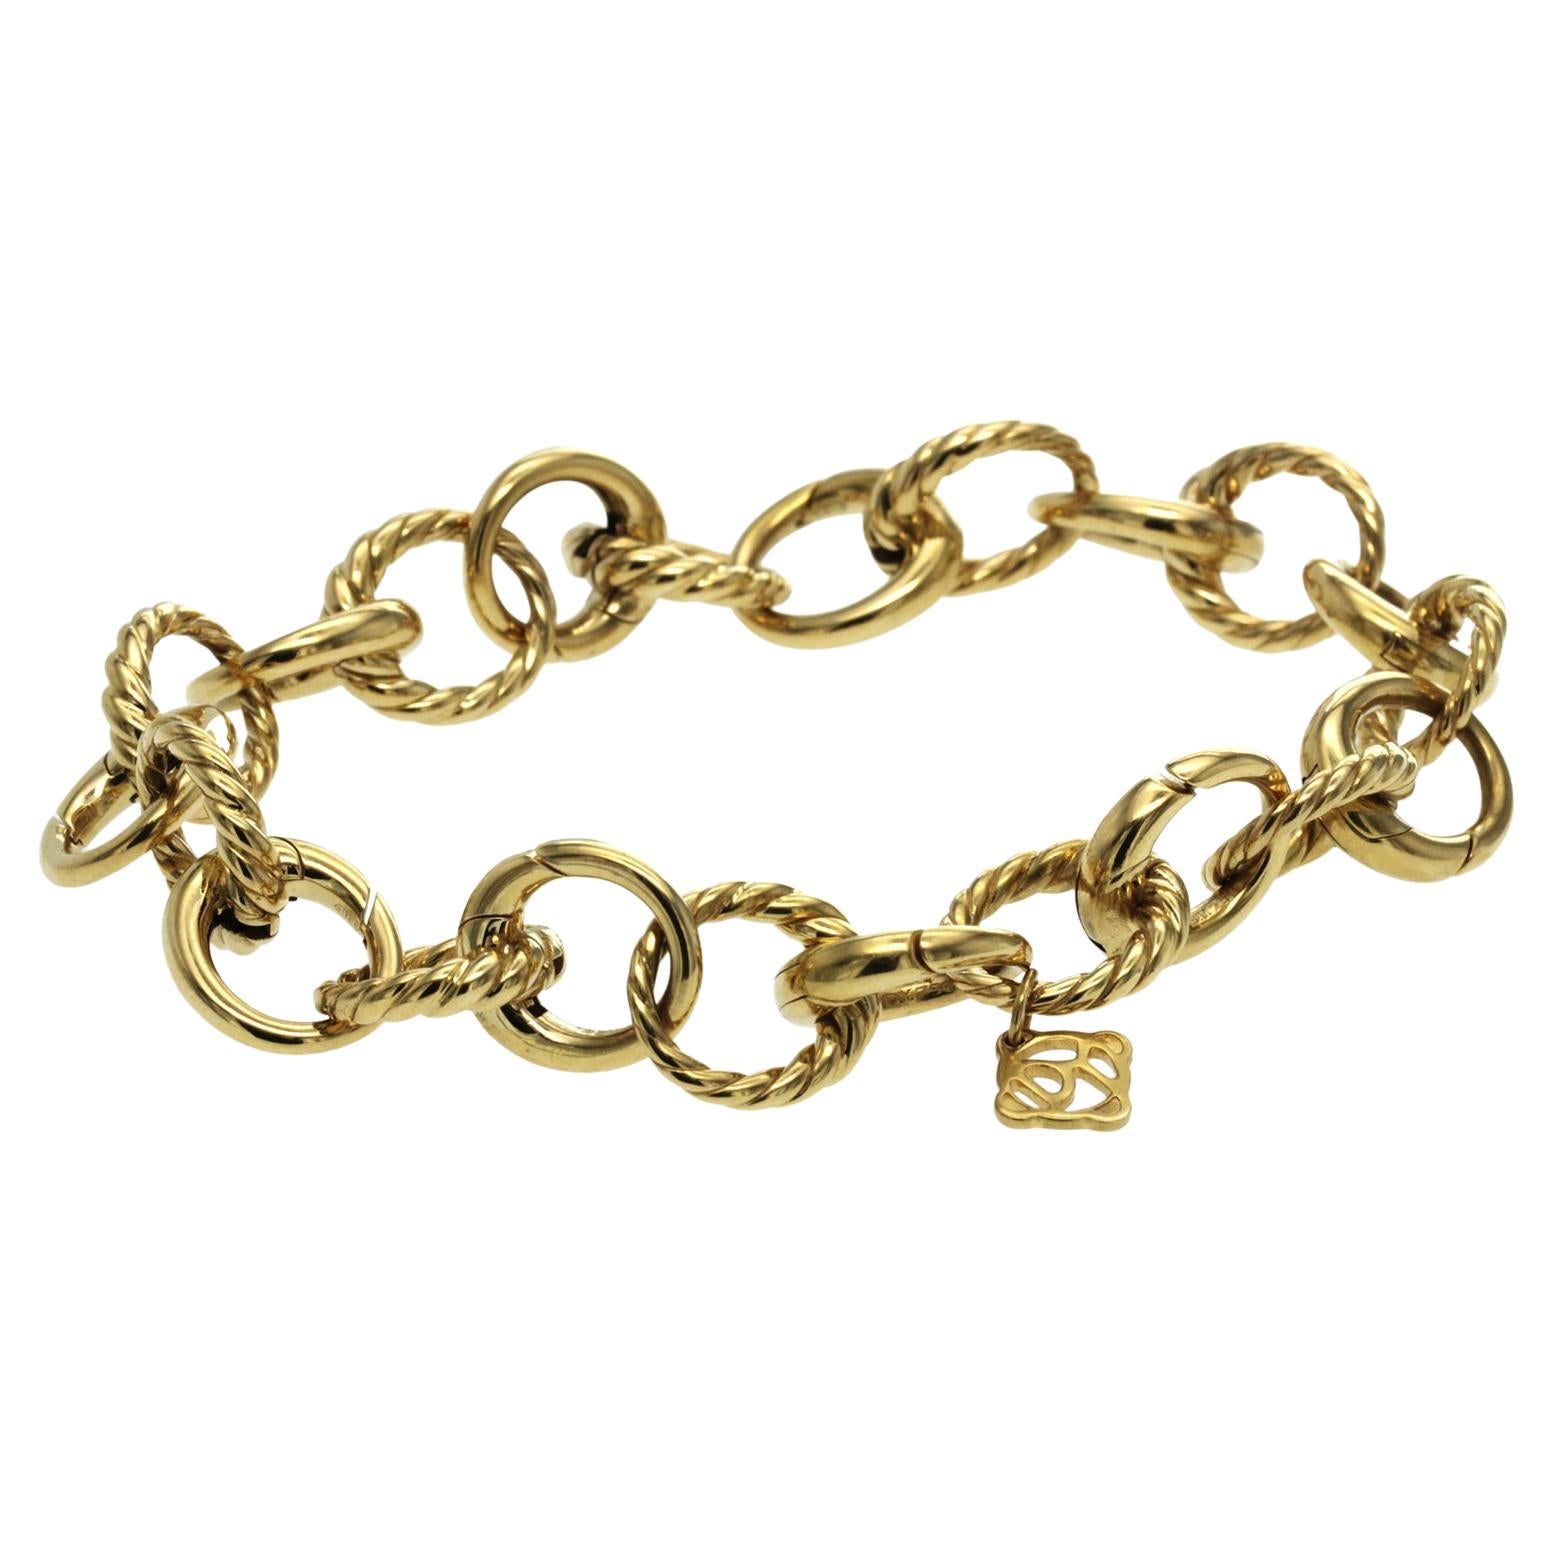 Authentic David Yurman 18K Yellow Gold Cable Link Charm Beads Bracelet For Sale